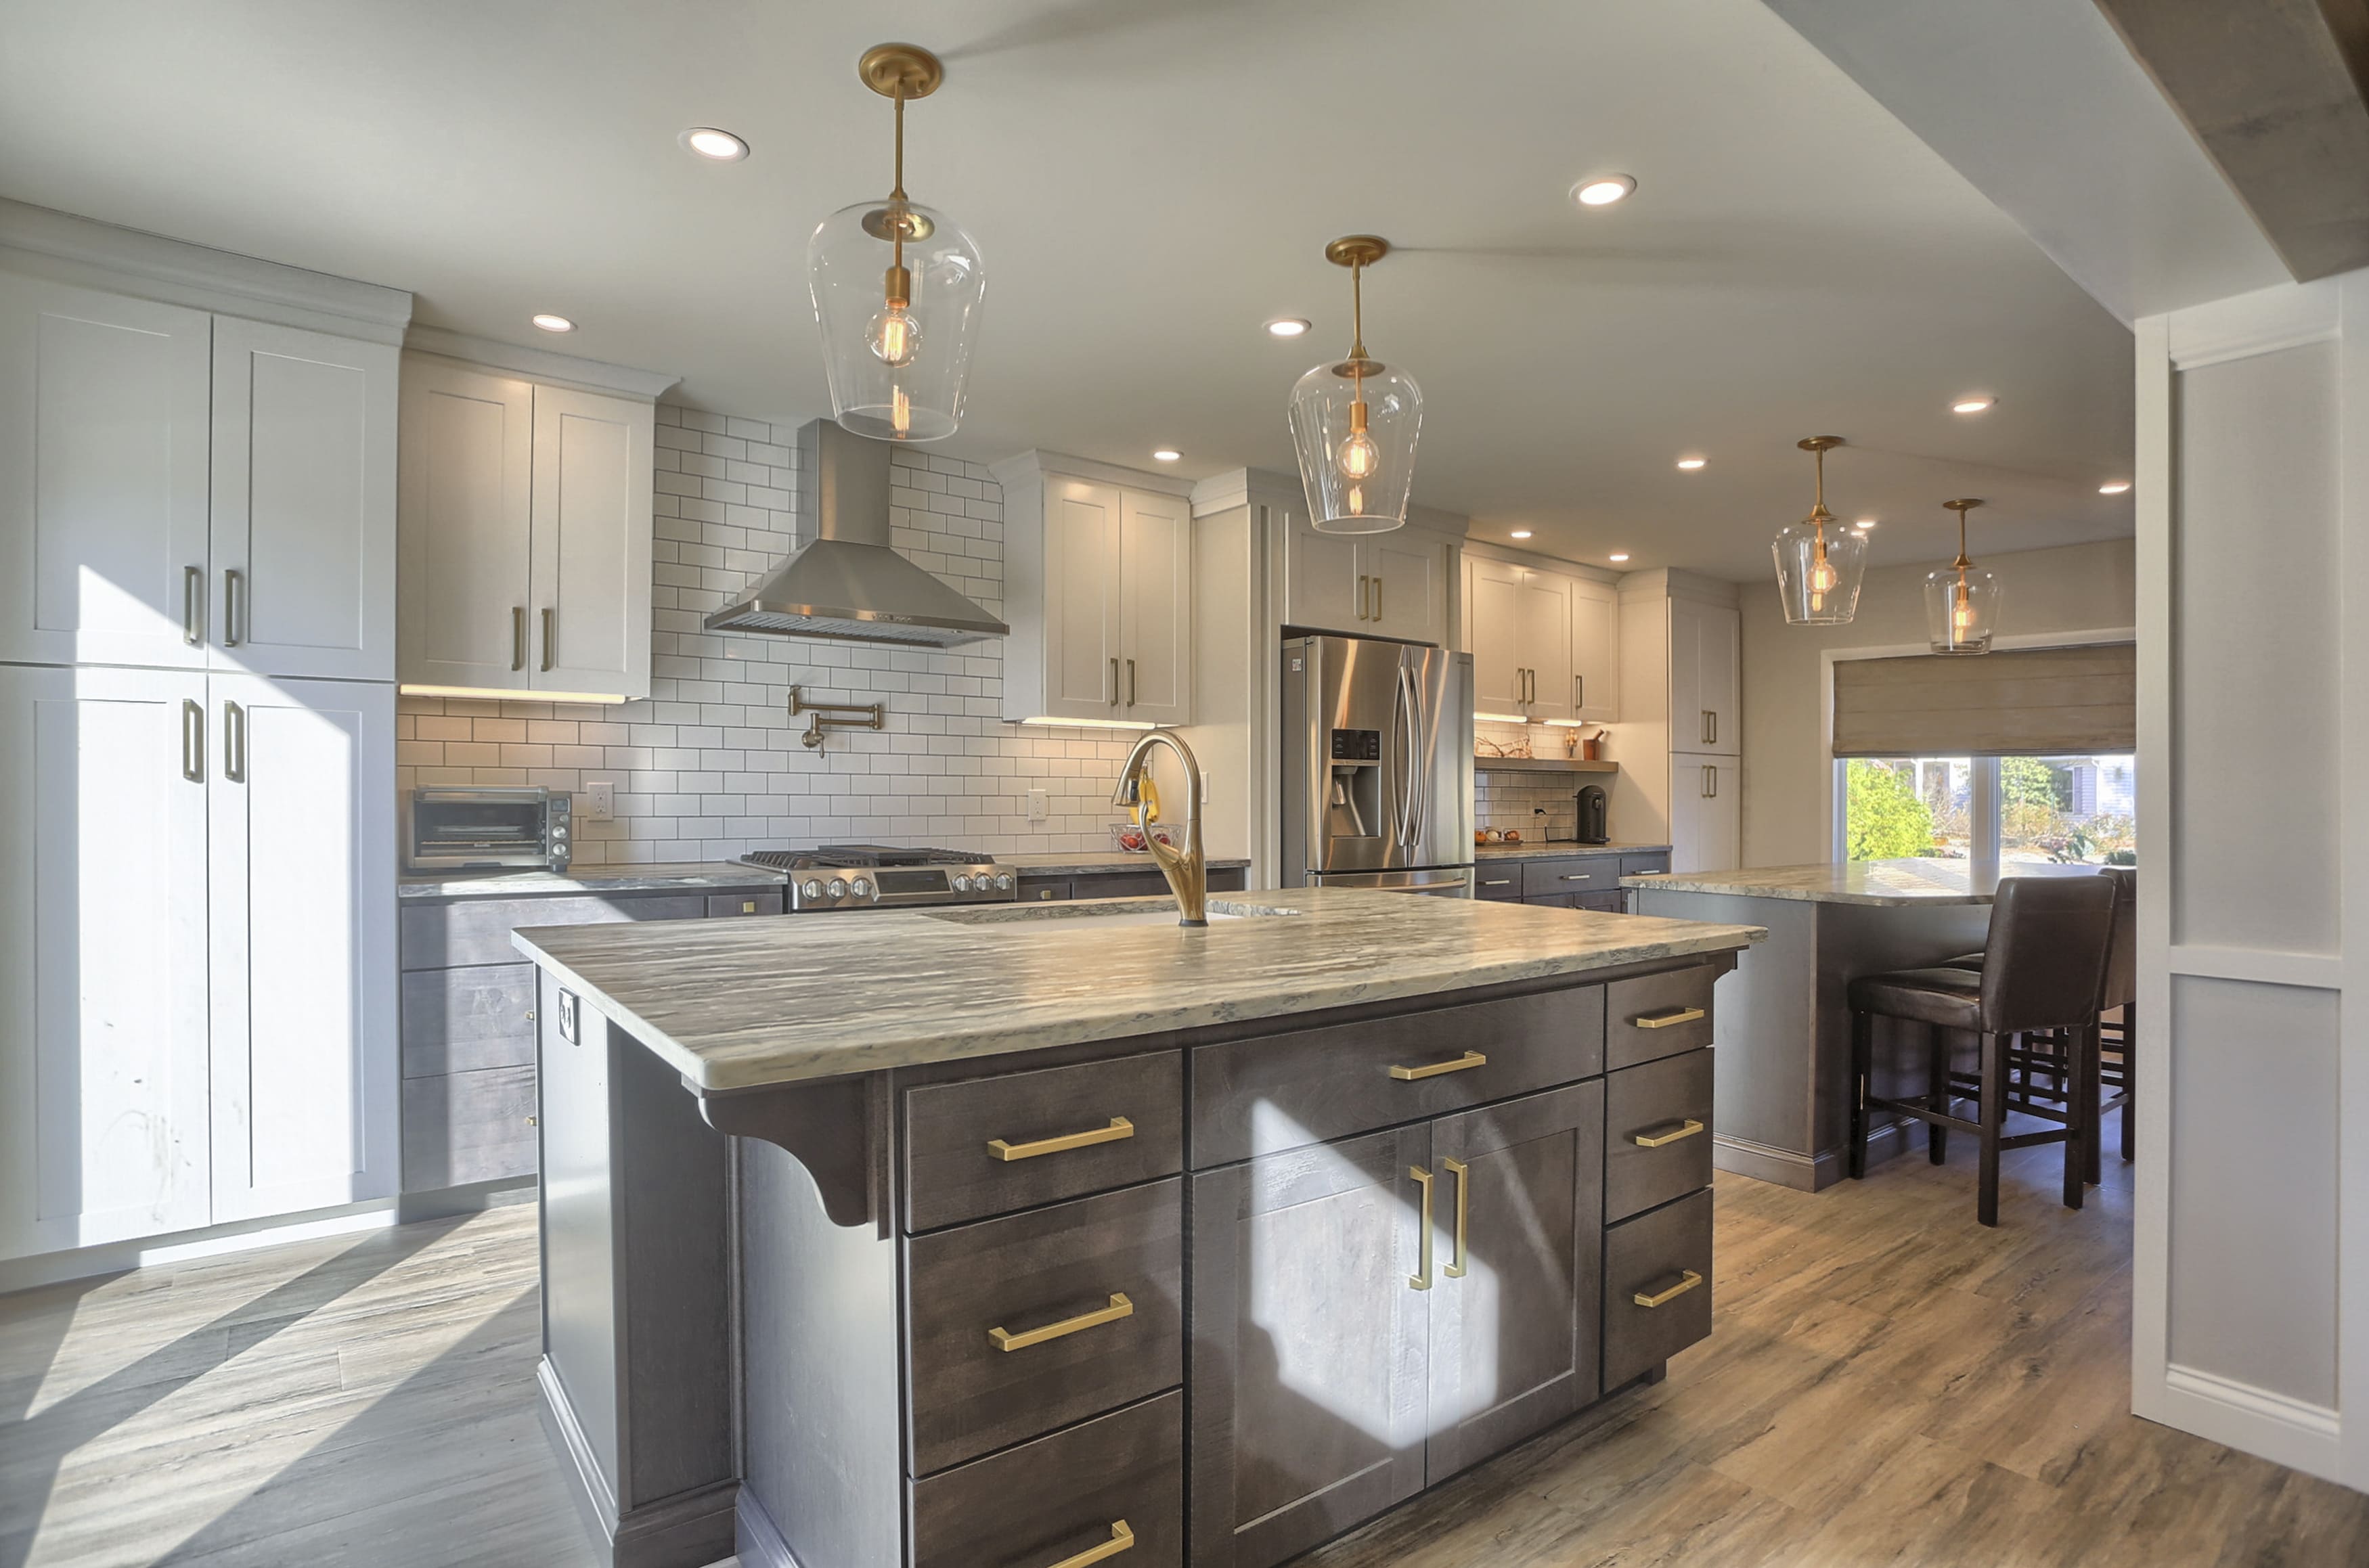 Harrisburg Metro Home Remodeling Gallery | Creative Building Concepts